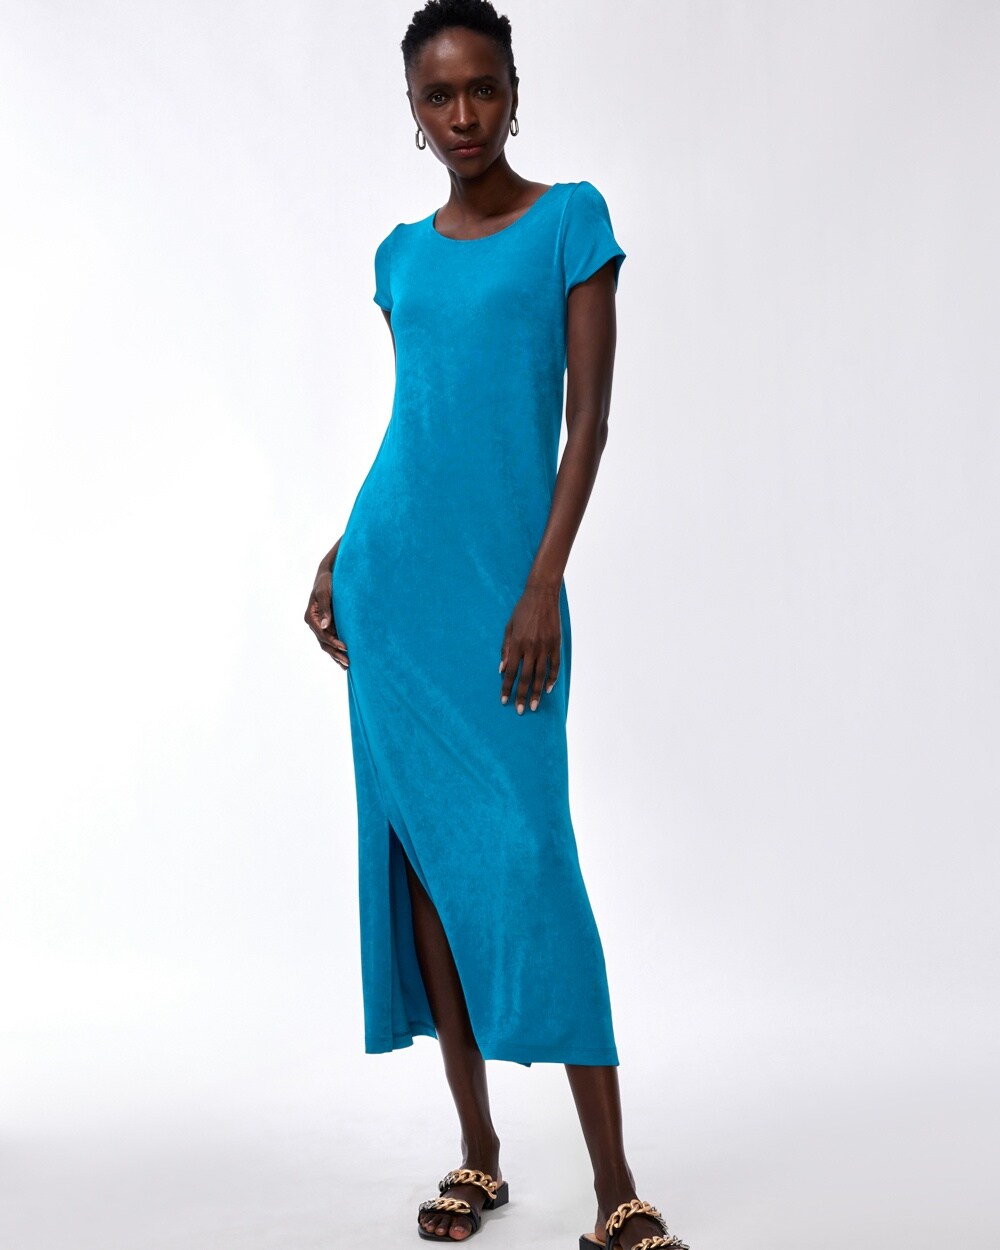 Travelers Classic Short Sleeve Maxi Dress video preview image, click to start video